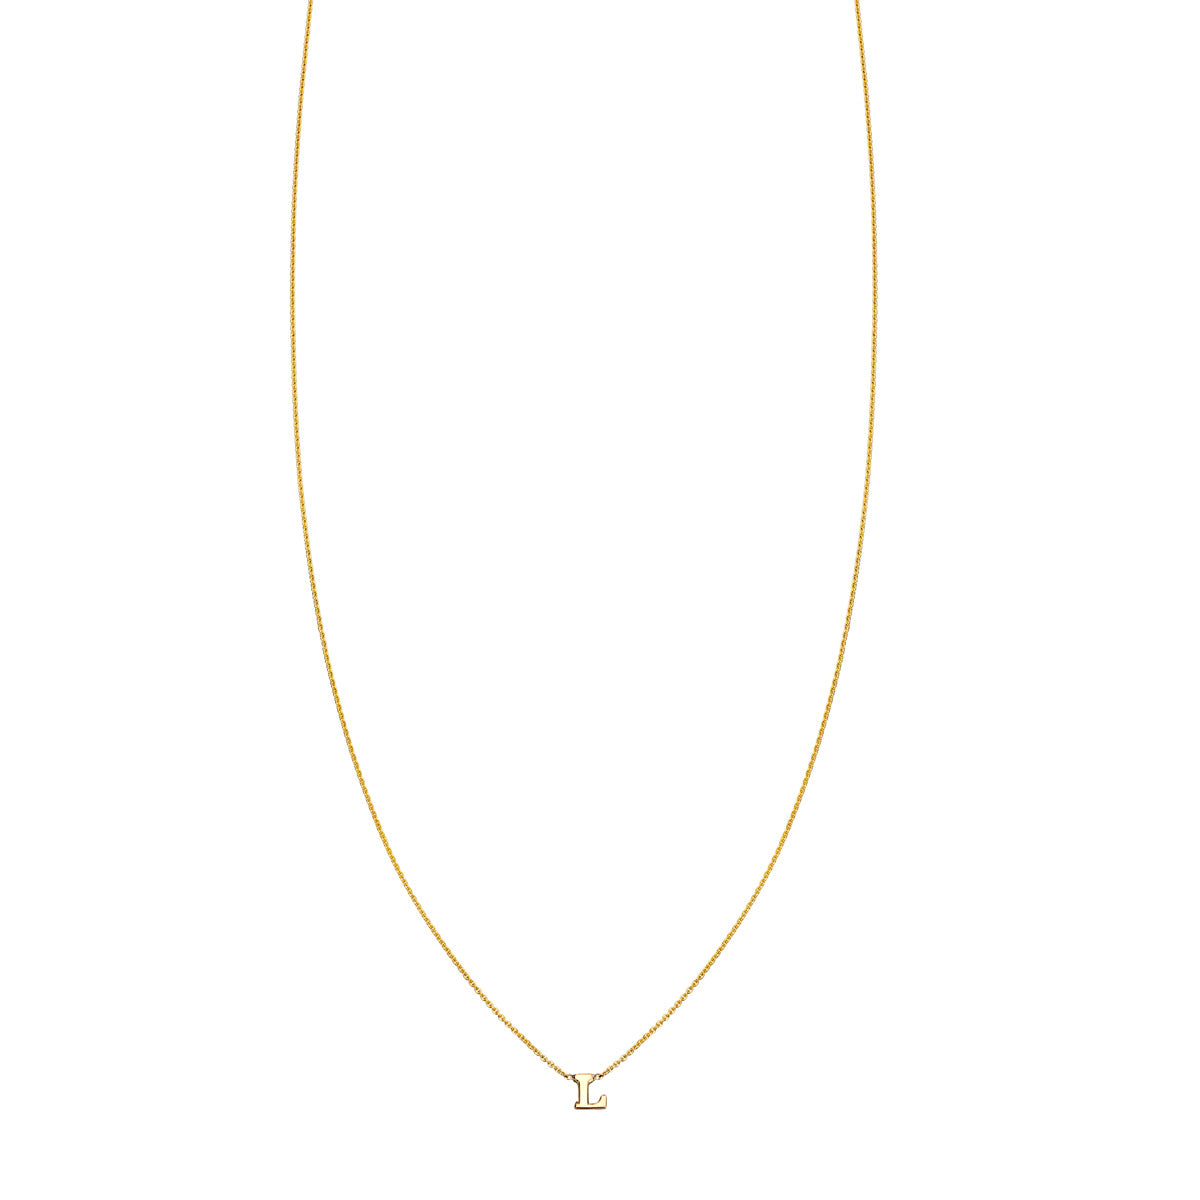 Gold 'L' initial necklace, personalized jewelry for elevated style